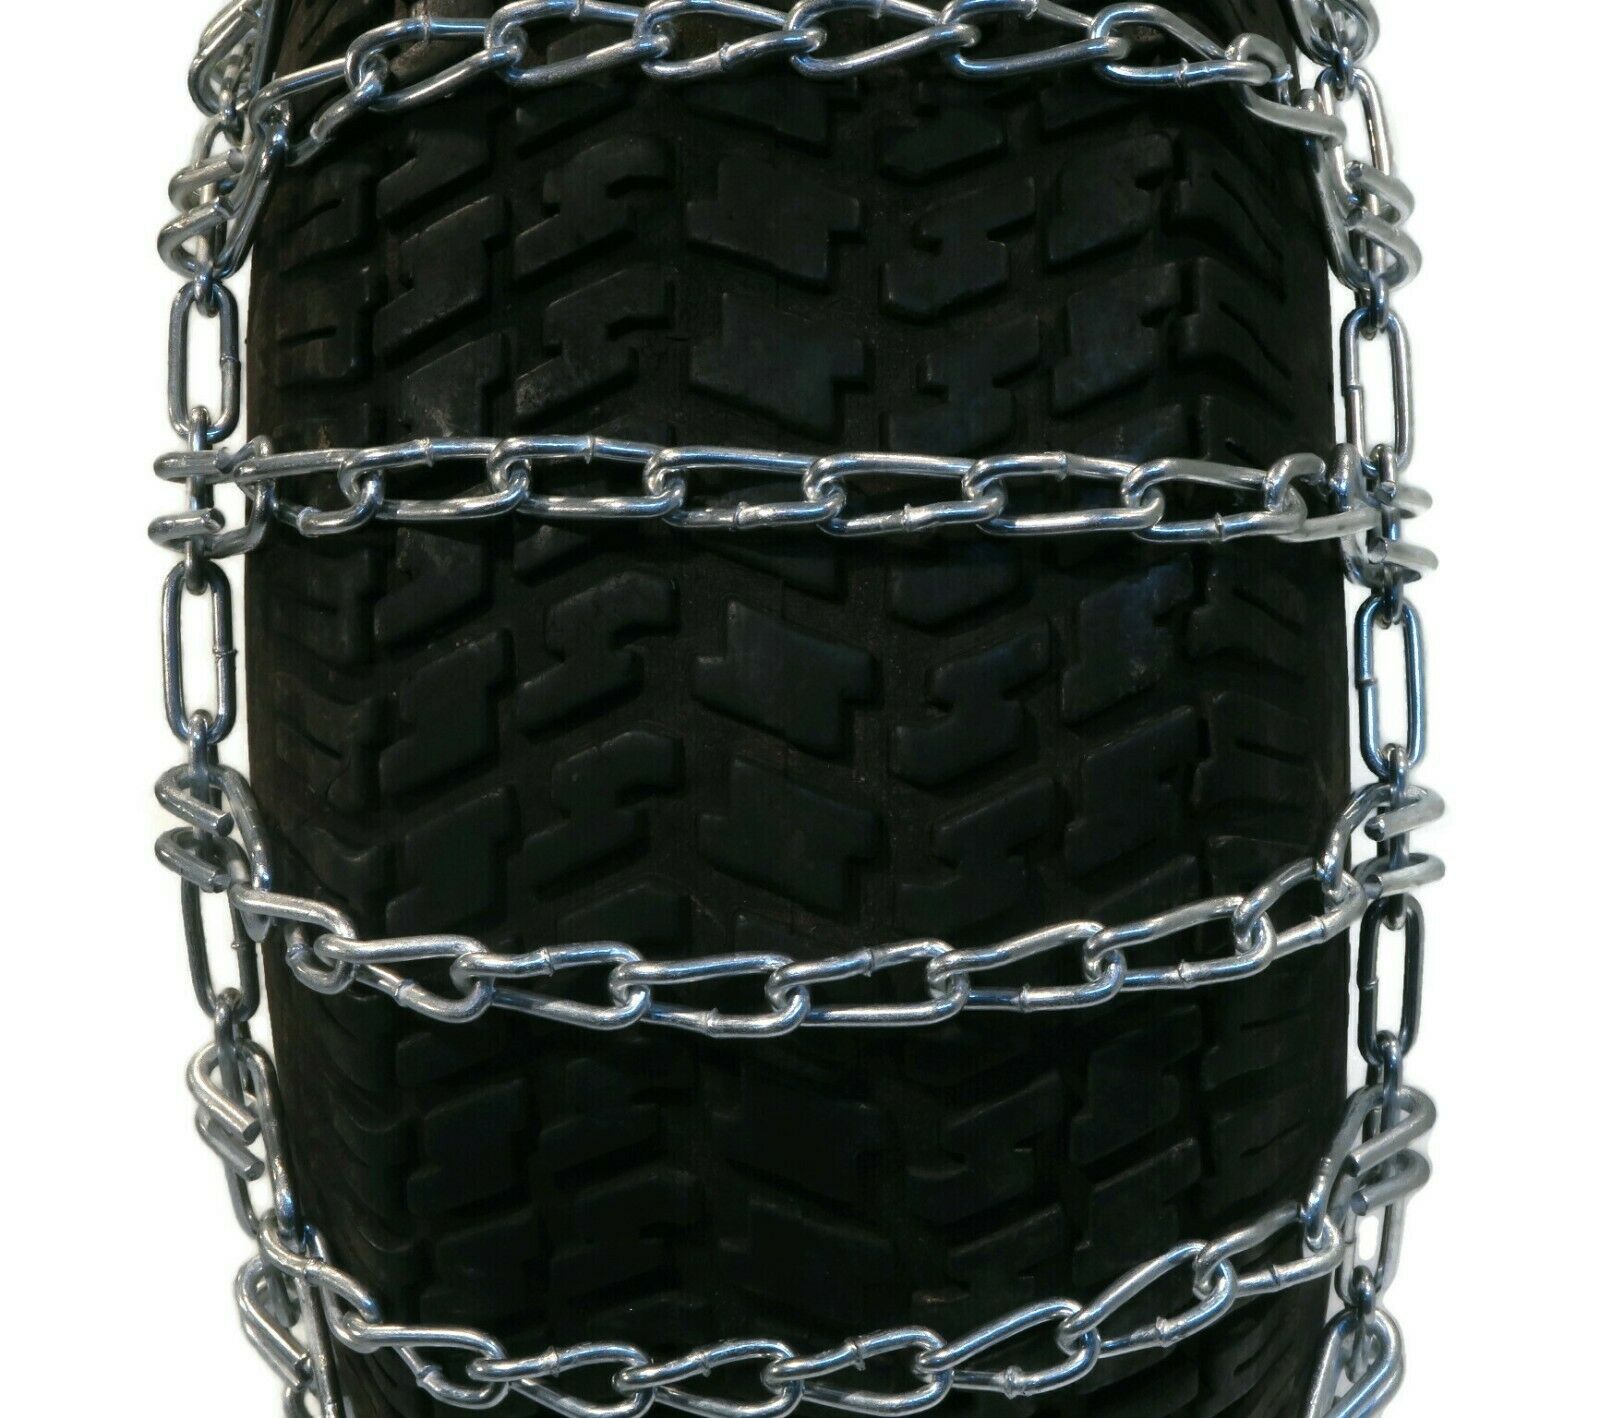 The ROP Shop | Pair 2 Link Tire Chains 16x6.50x8 For John Deere Lawn Mower Tractor Rider - image 5 of 6